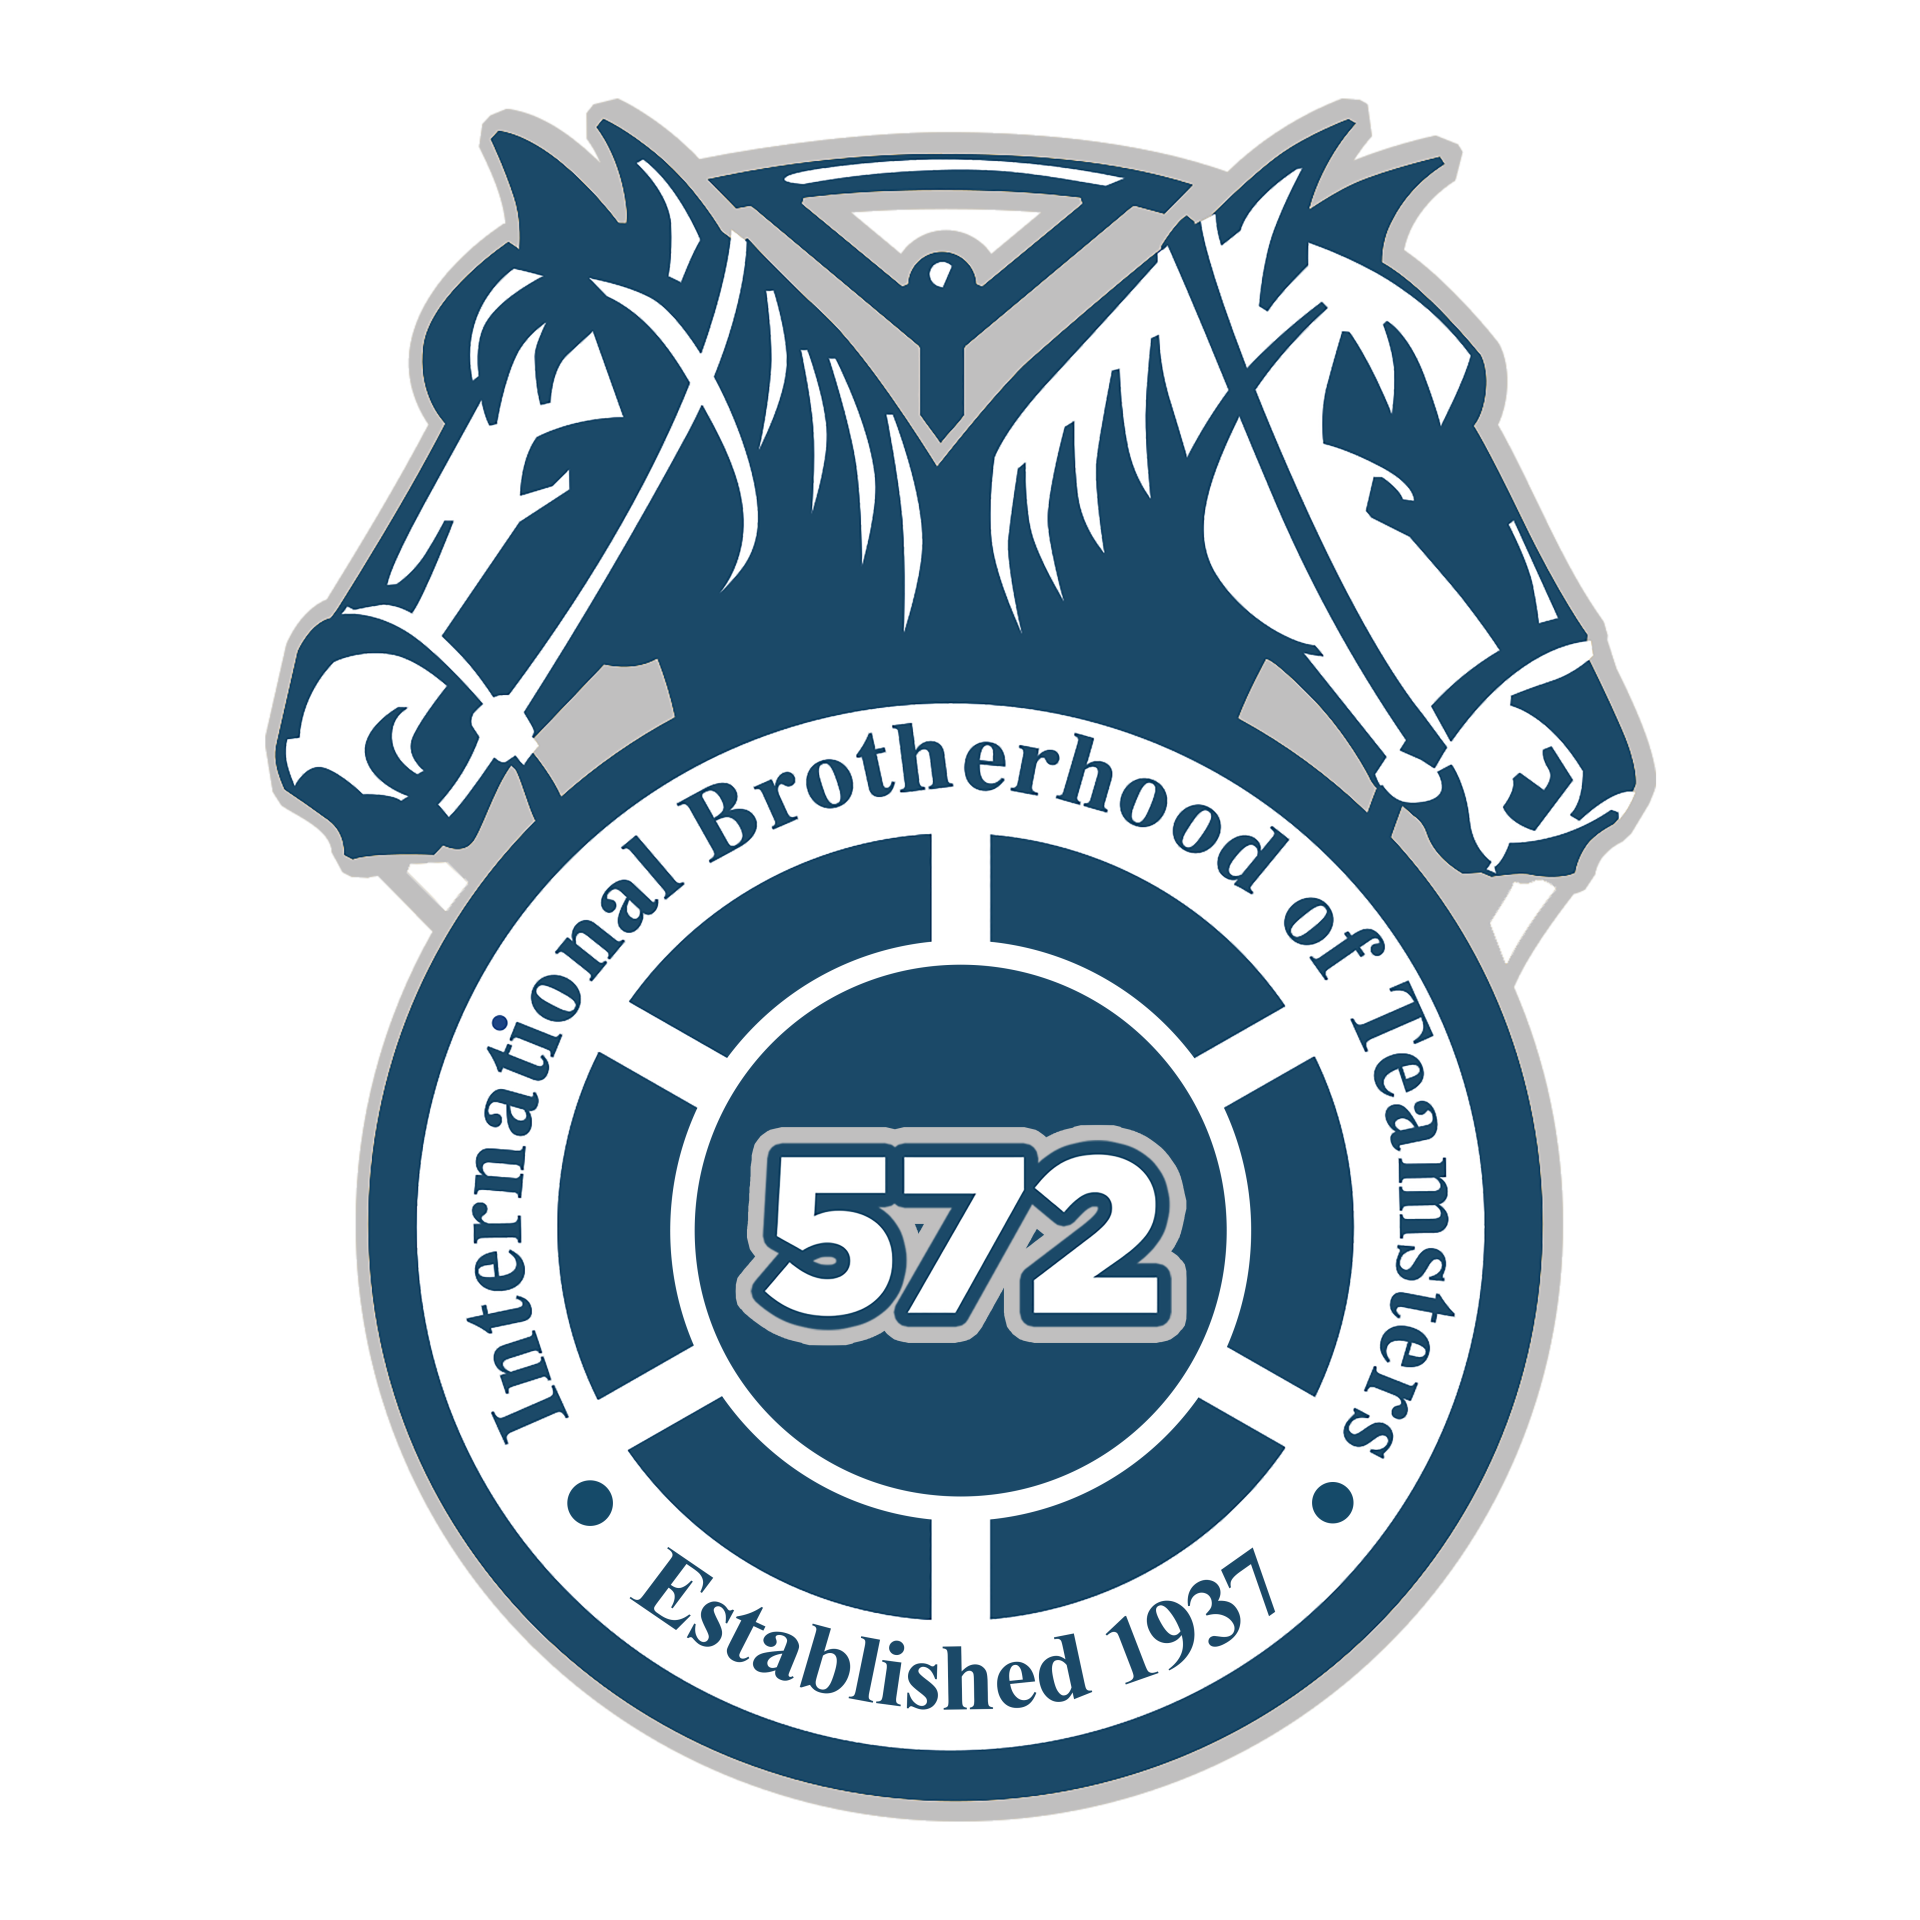 Teamsters Local 572